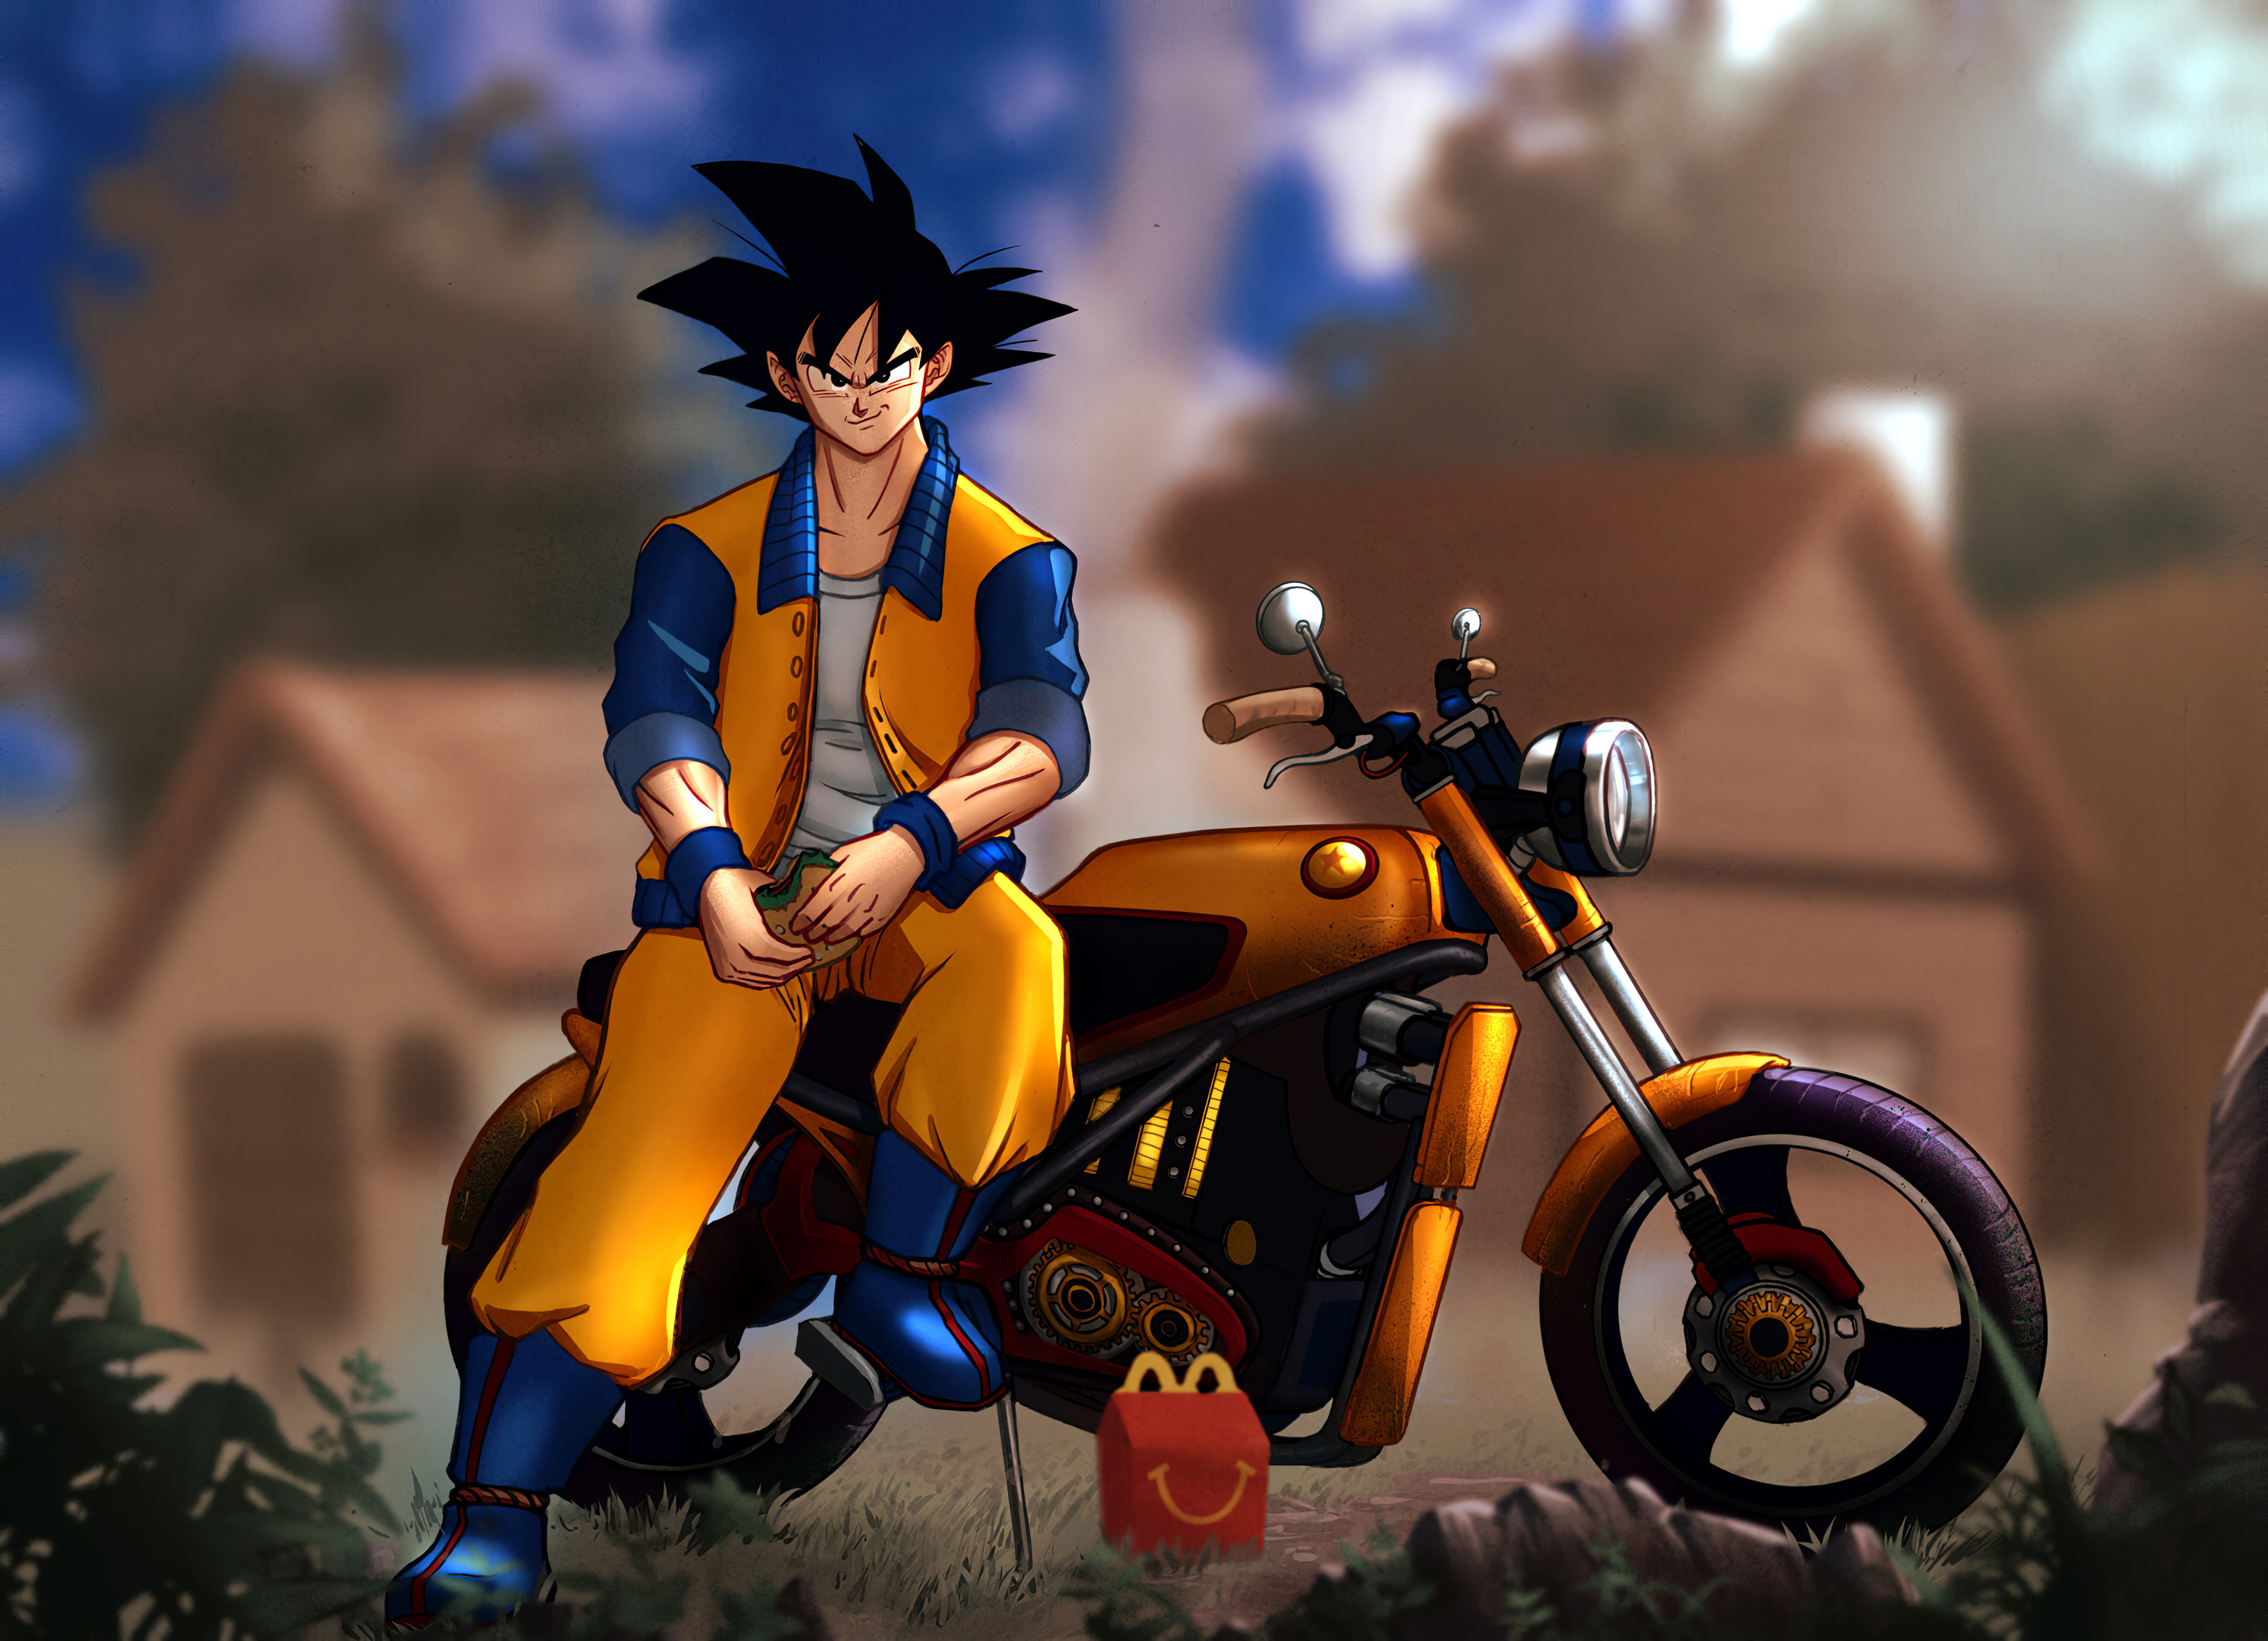 Share 129+ anime about motorcycle latest - 3tdesign.edu.vn